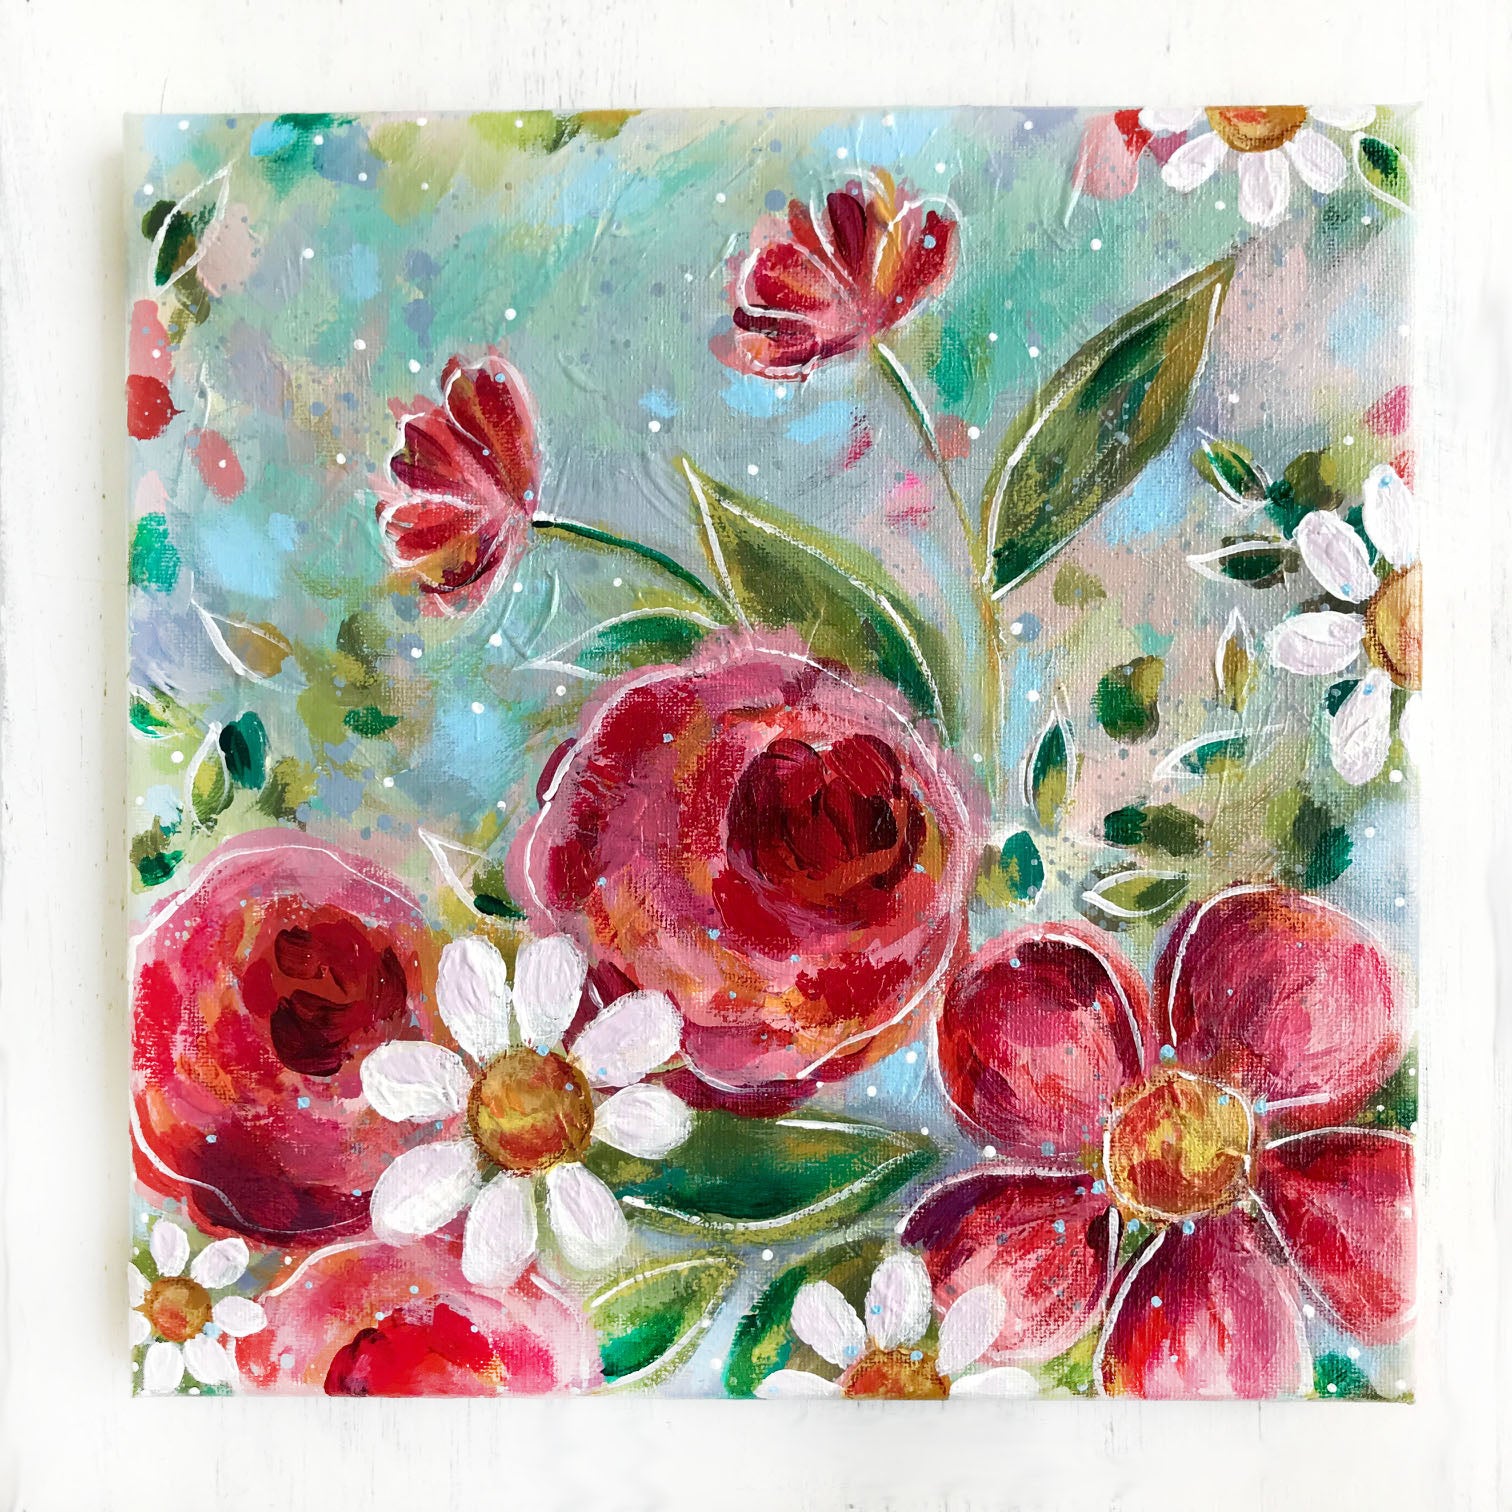 New Spring Floral Mixed Media Painting on 10x10 inch canvas - Bethany Joy Art